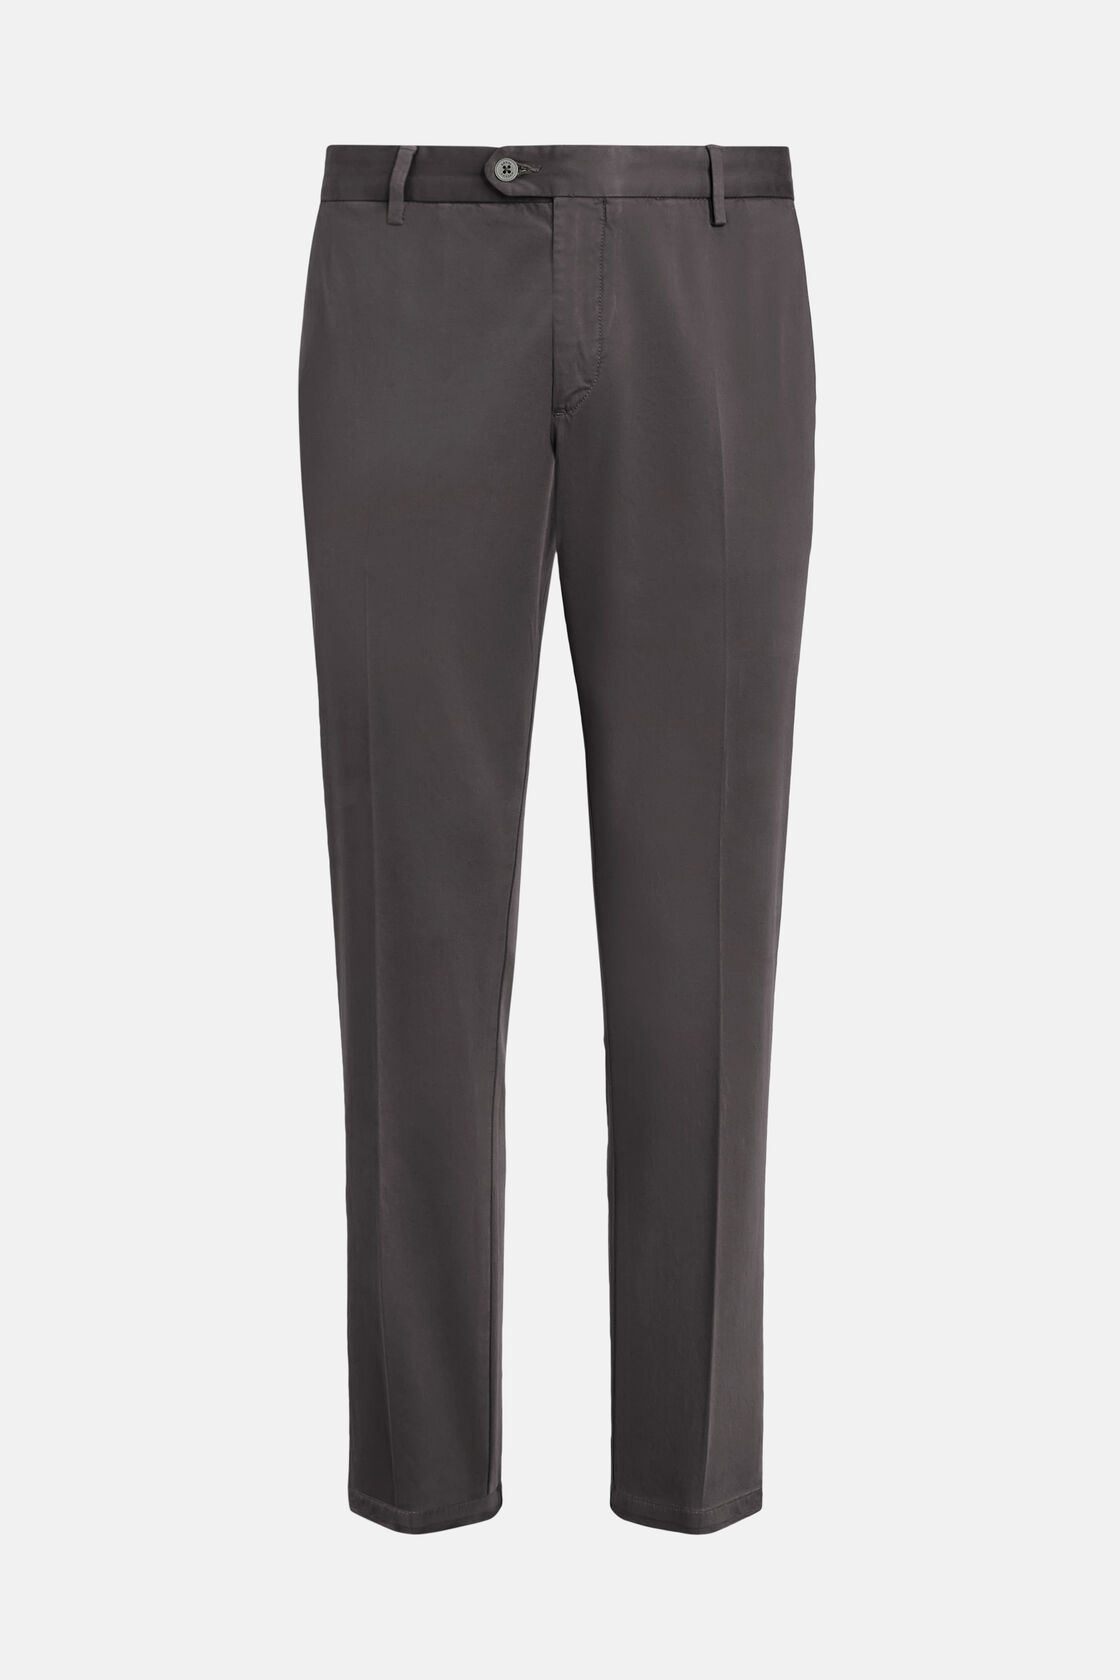 Stretch satin trousers, Grey, hi-res